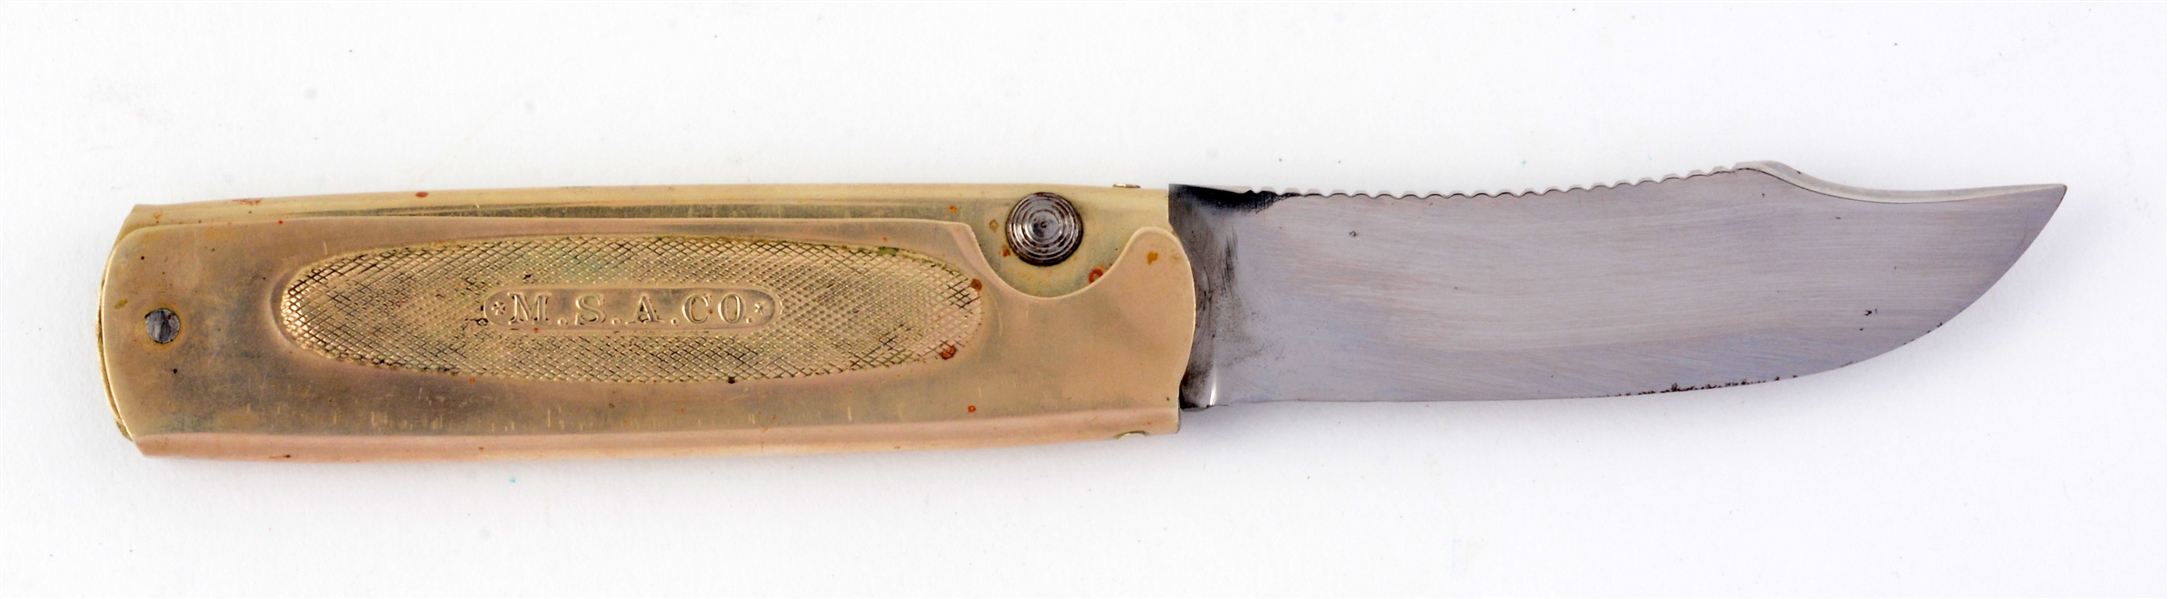 M.S.A CO. TWO PART FOLDING SAFETY FISH KNIFE. 